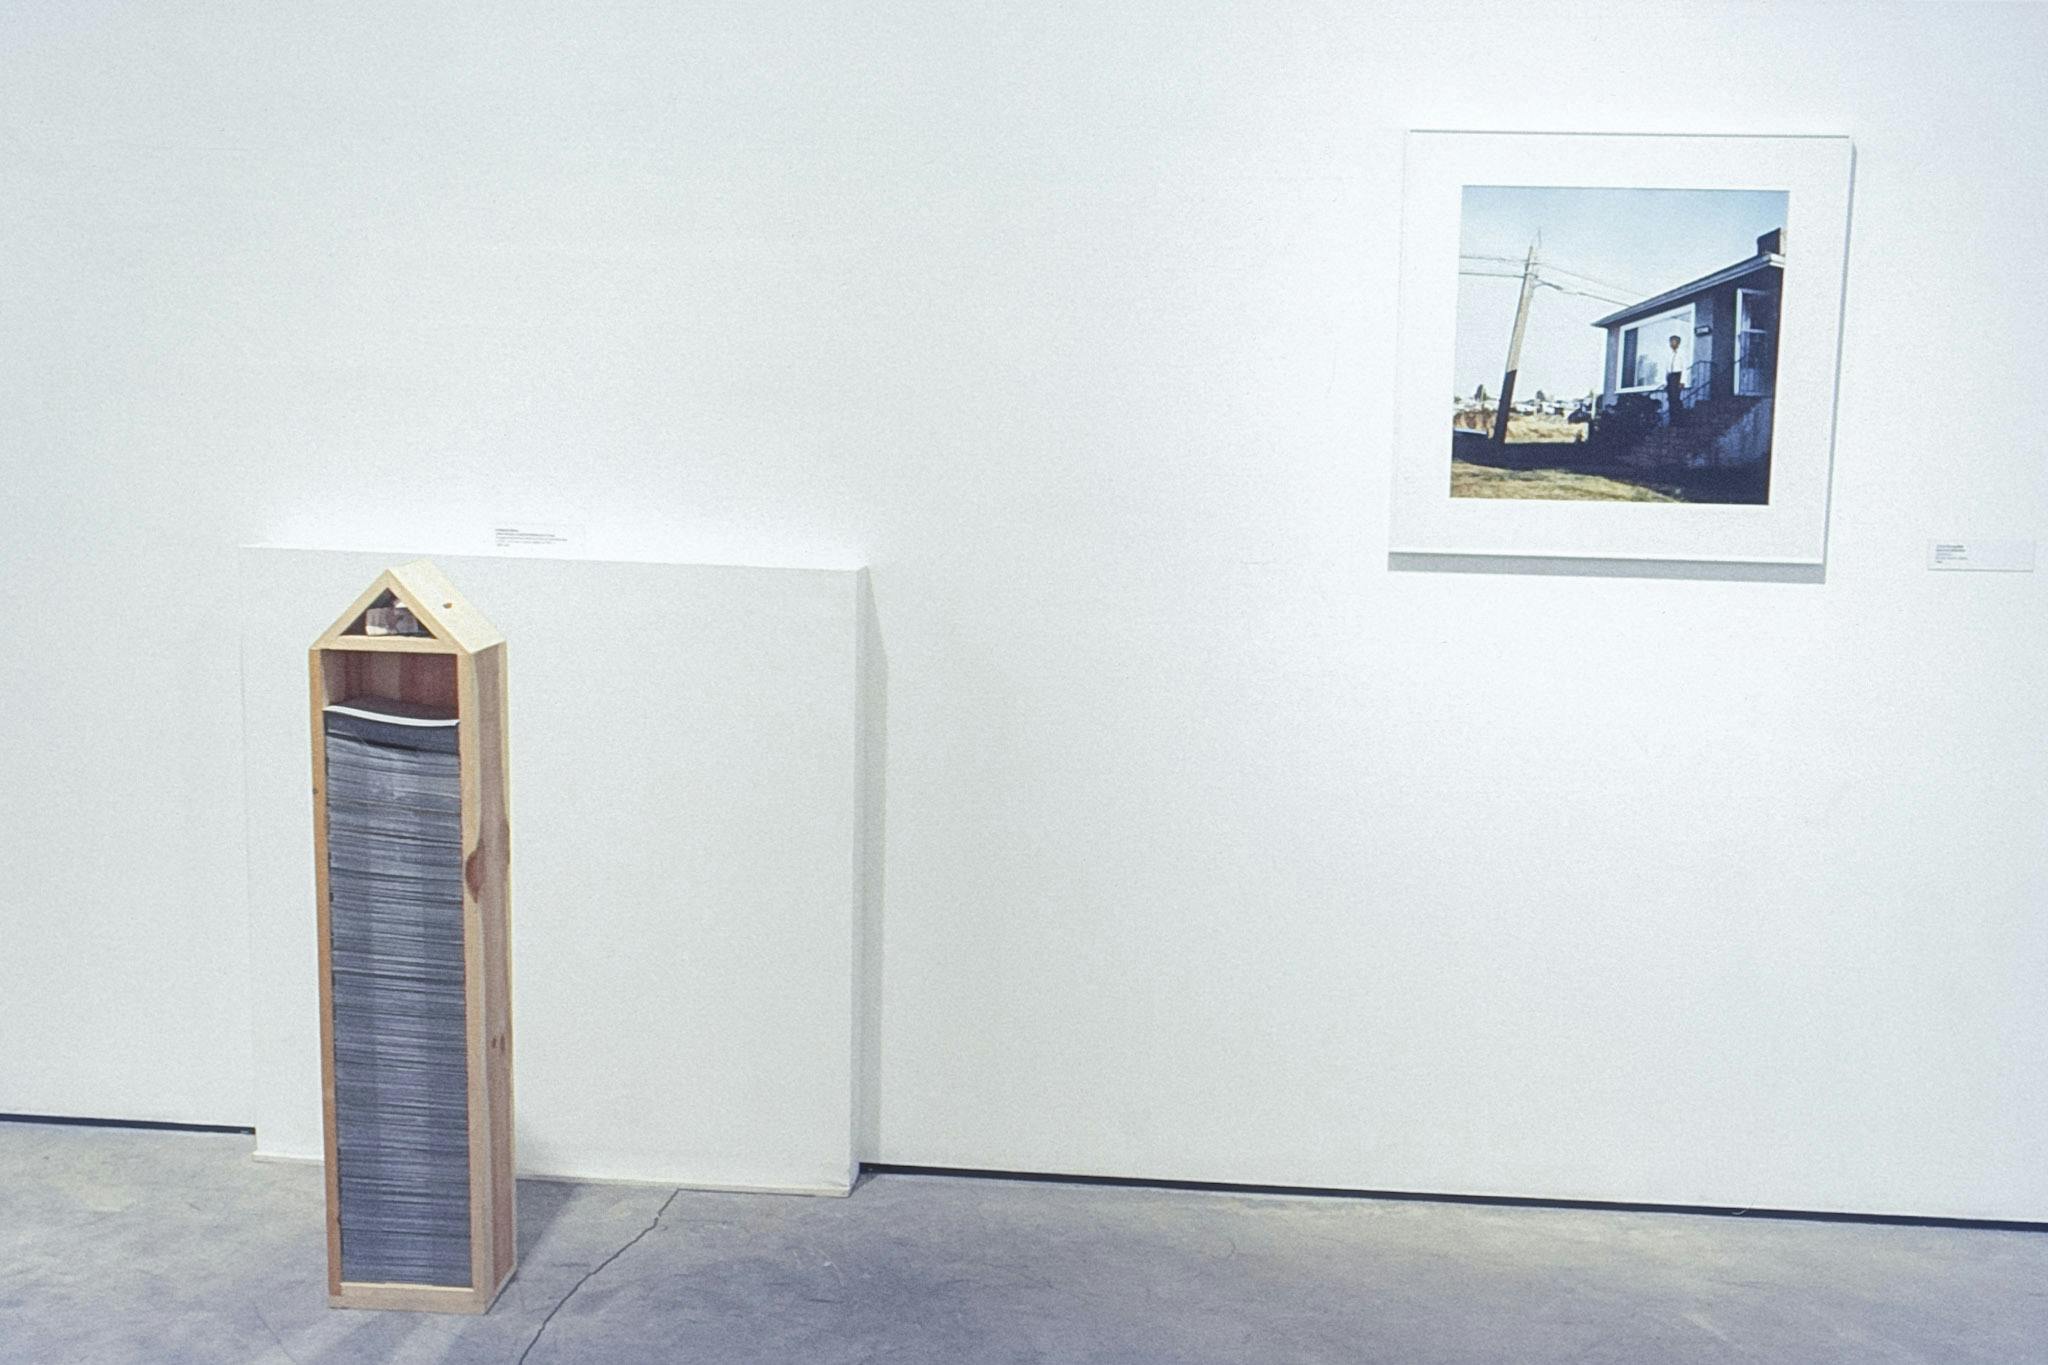 Two artworks in a gallery space. One is a small, vertical, house-shaped wood structure holding a tall stack of papers. The other is a colour photo of a person on the steps of a small grey house.